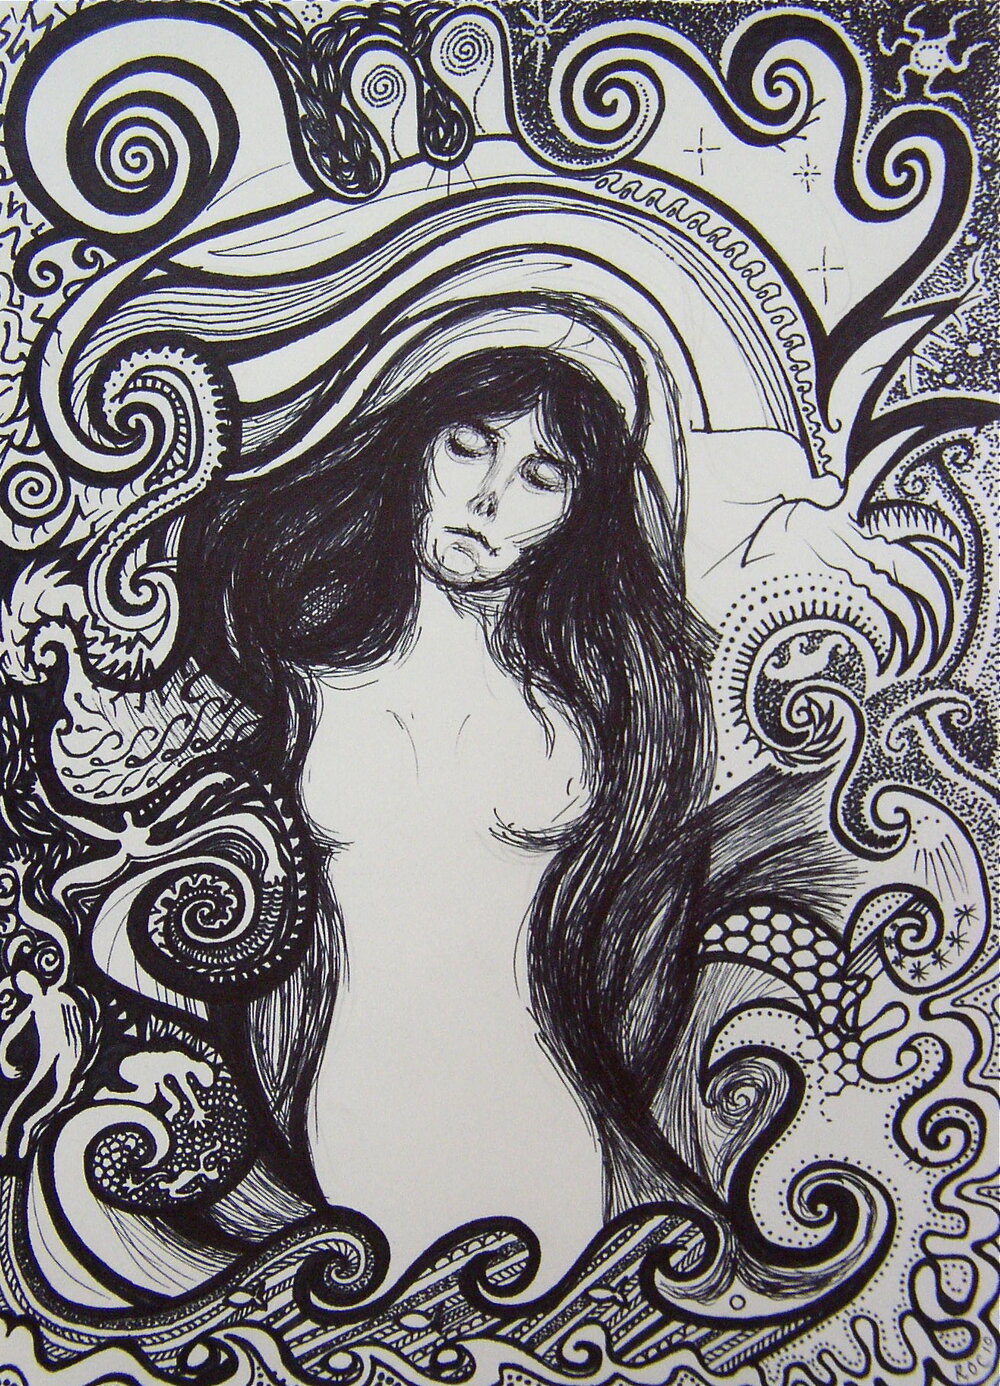  “Munch’s Madonna”  Pen and ink, 21cm x 29.7 cm on cartridge, 2010. 